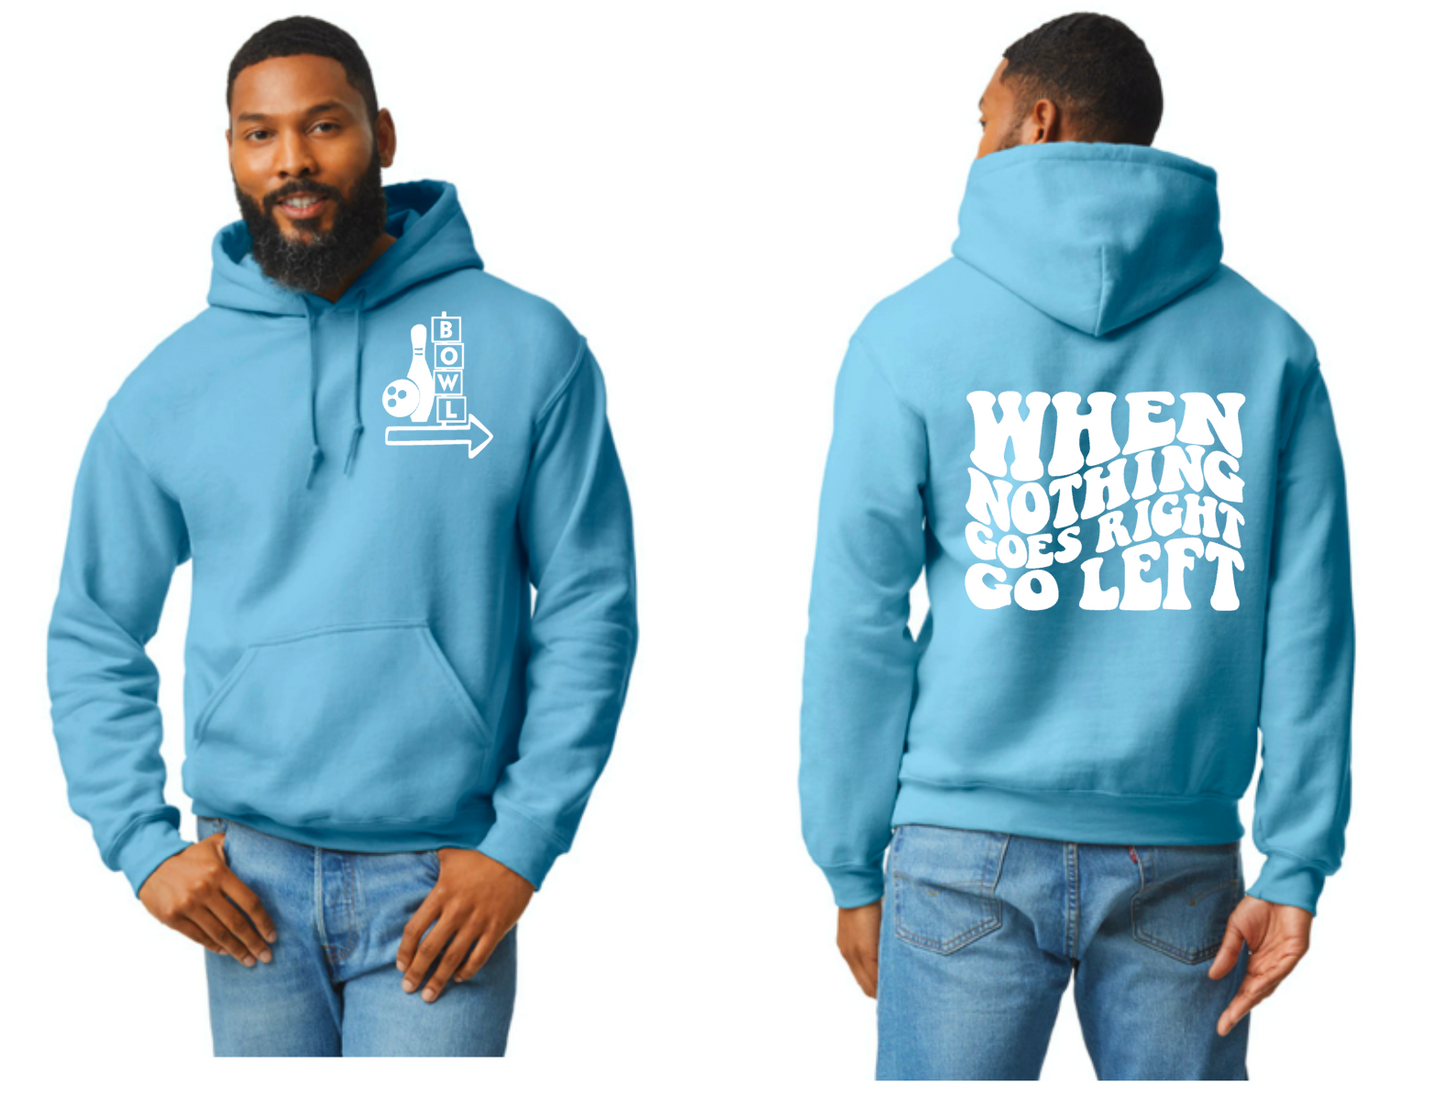 when nothing goes right hoodie